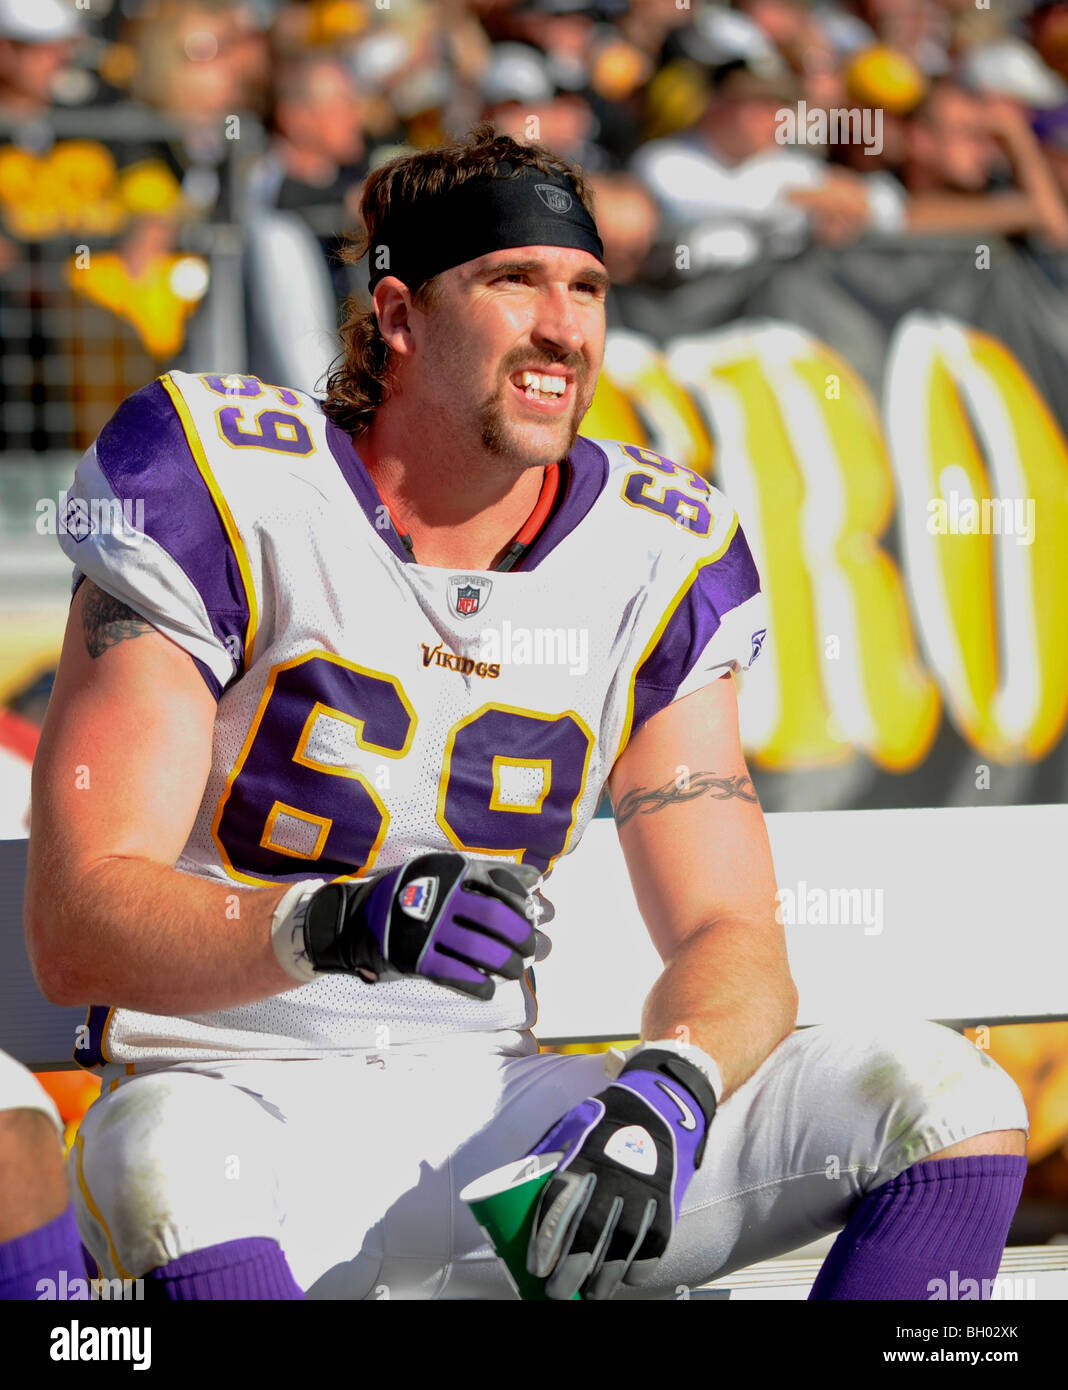 Jared Allen to officially retire with Minnesota Vikings 